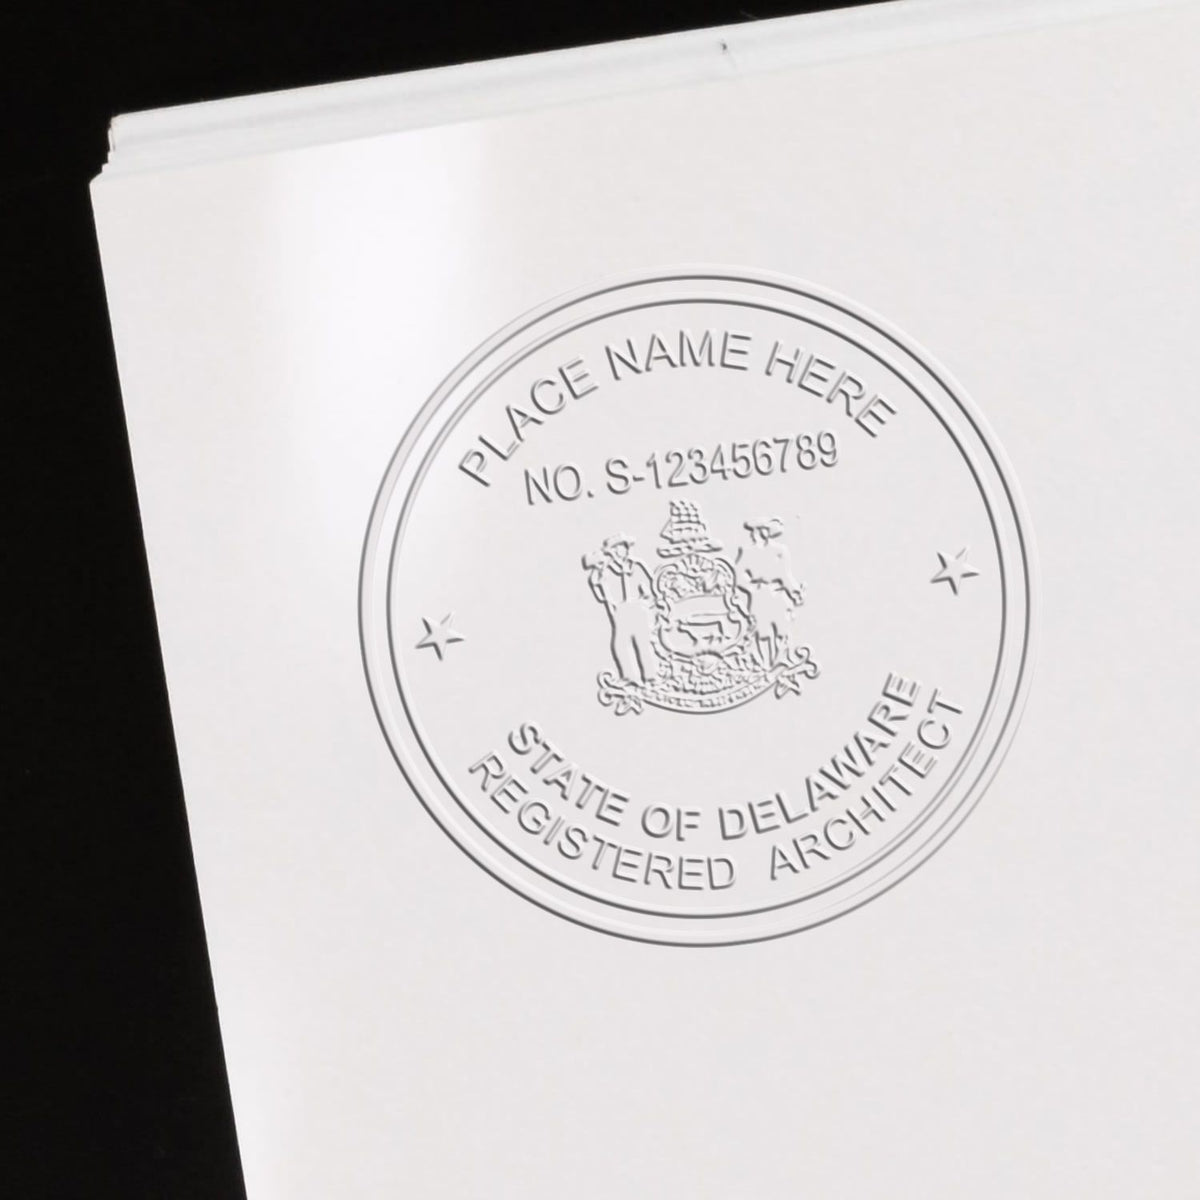 A photograph of the Hybrid Delaware Architect Seal stamp impression reveals a vivid, professional image of the on paper.